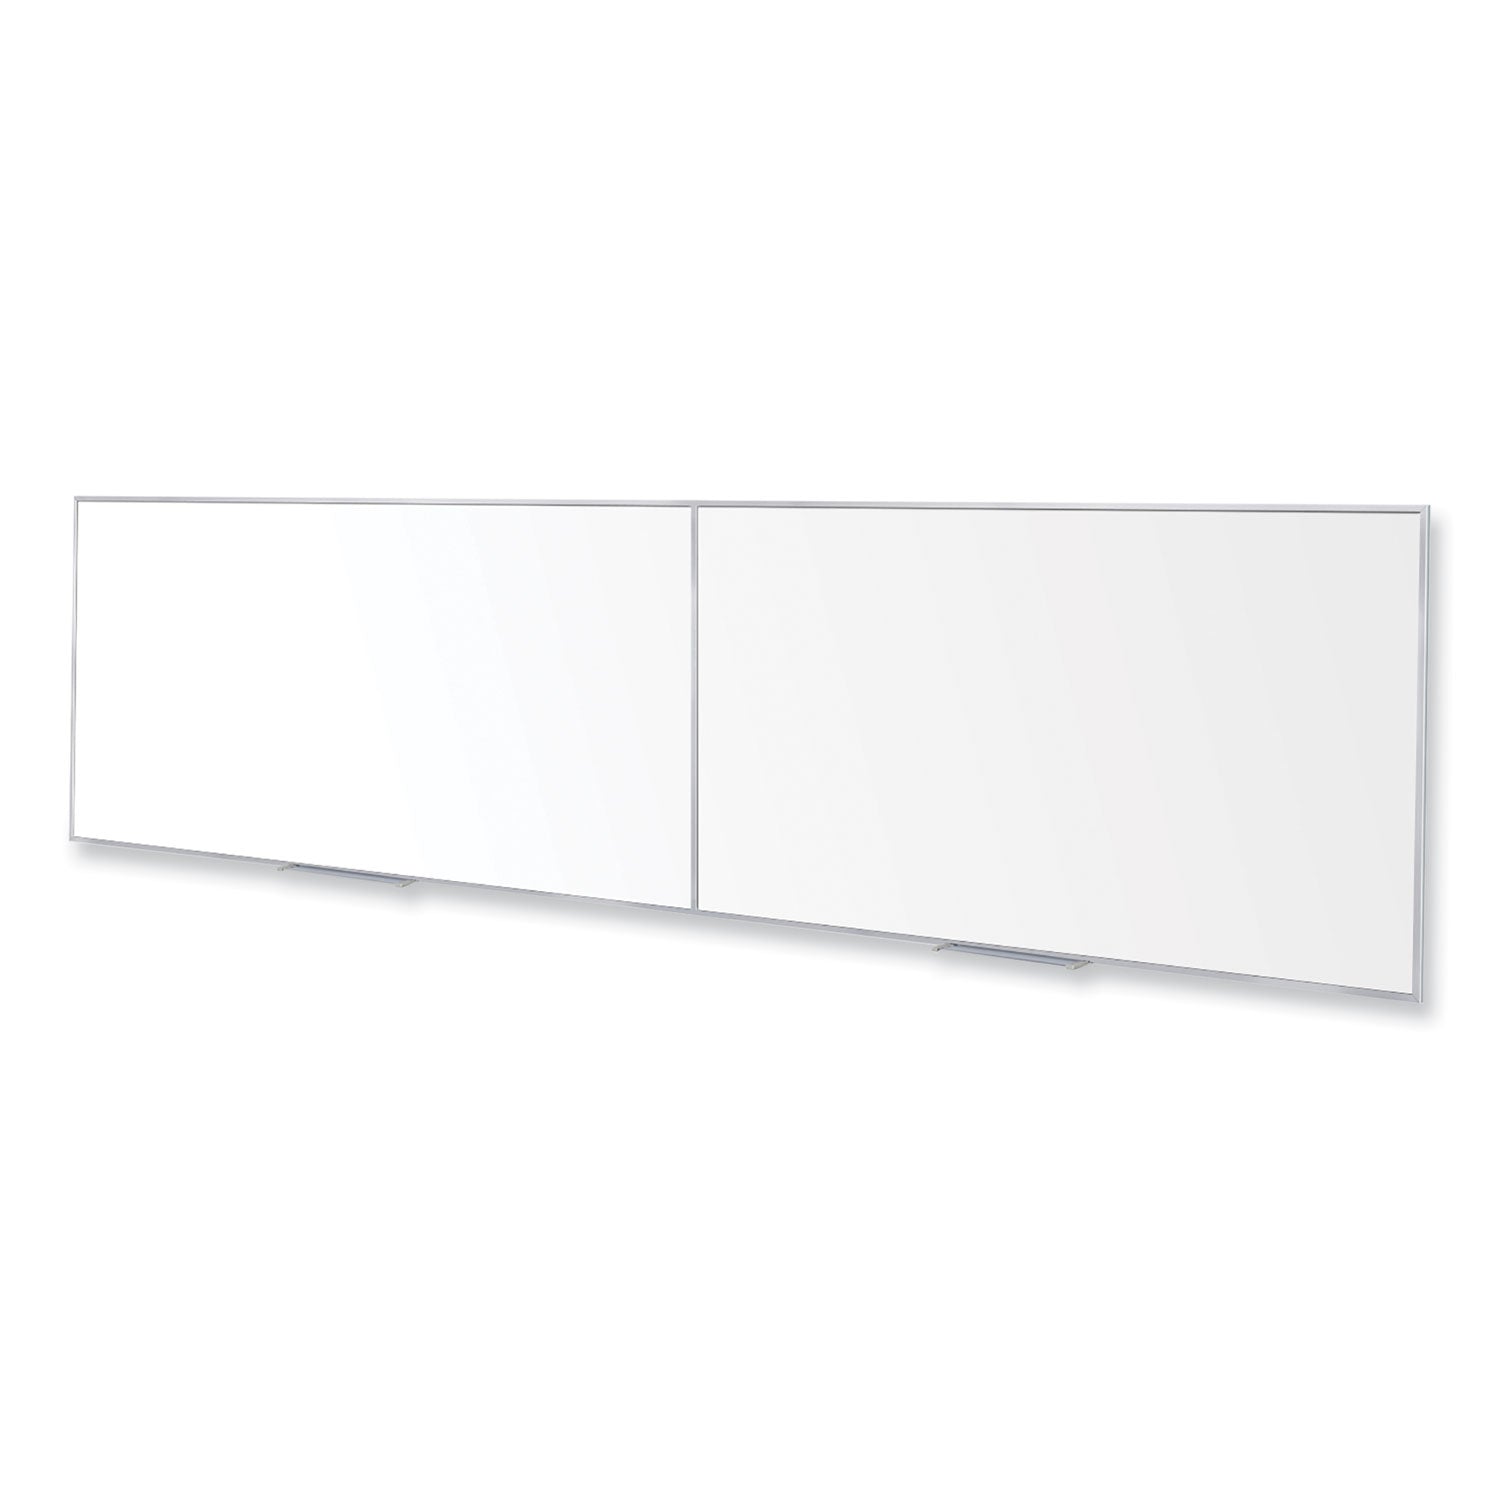 magnetic-porcelain-whiteboard-with-satin-aluminum-frame-193-x-485-white-surface-ships-in-7-10-business-days_ghem14164 - 1